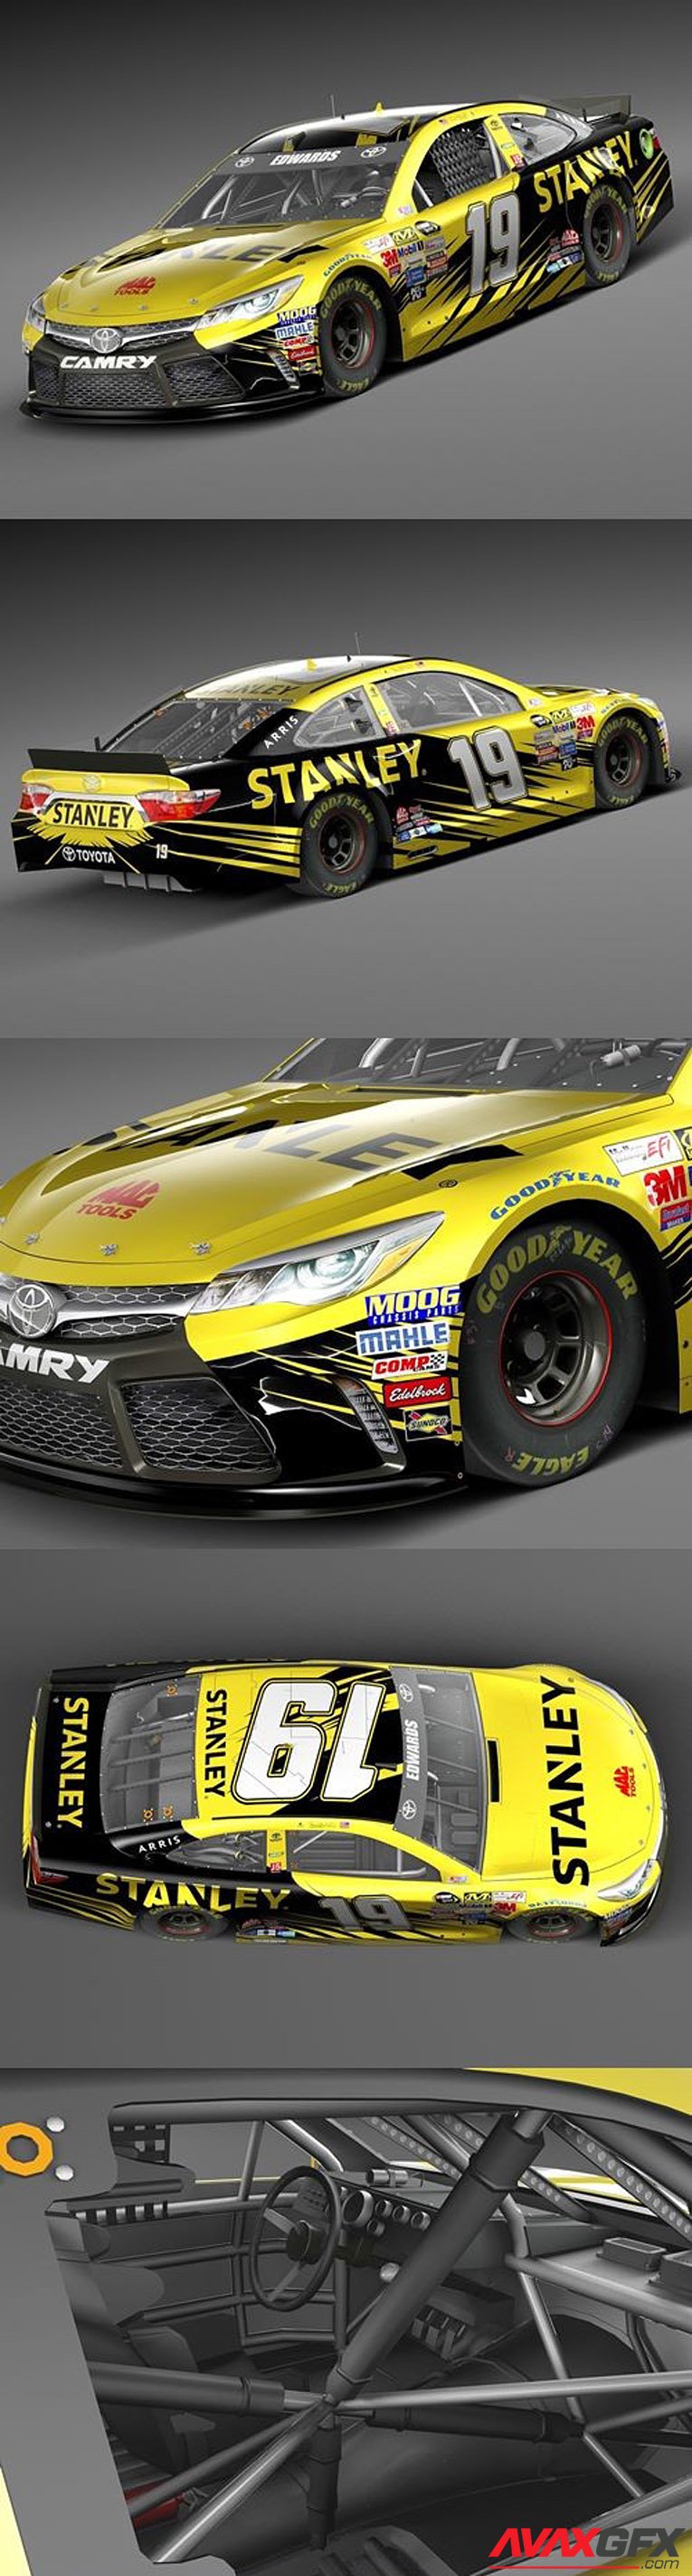 Toyota Camry Stanley 2015 Nascar LowPoly